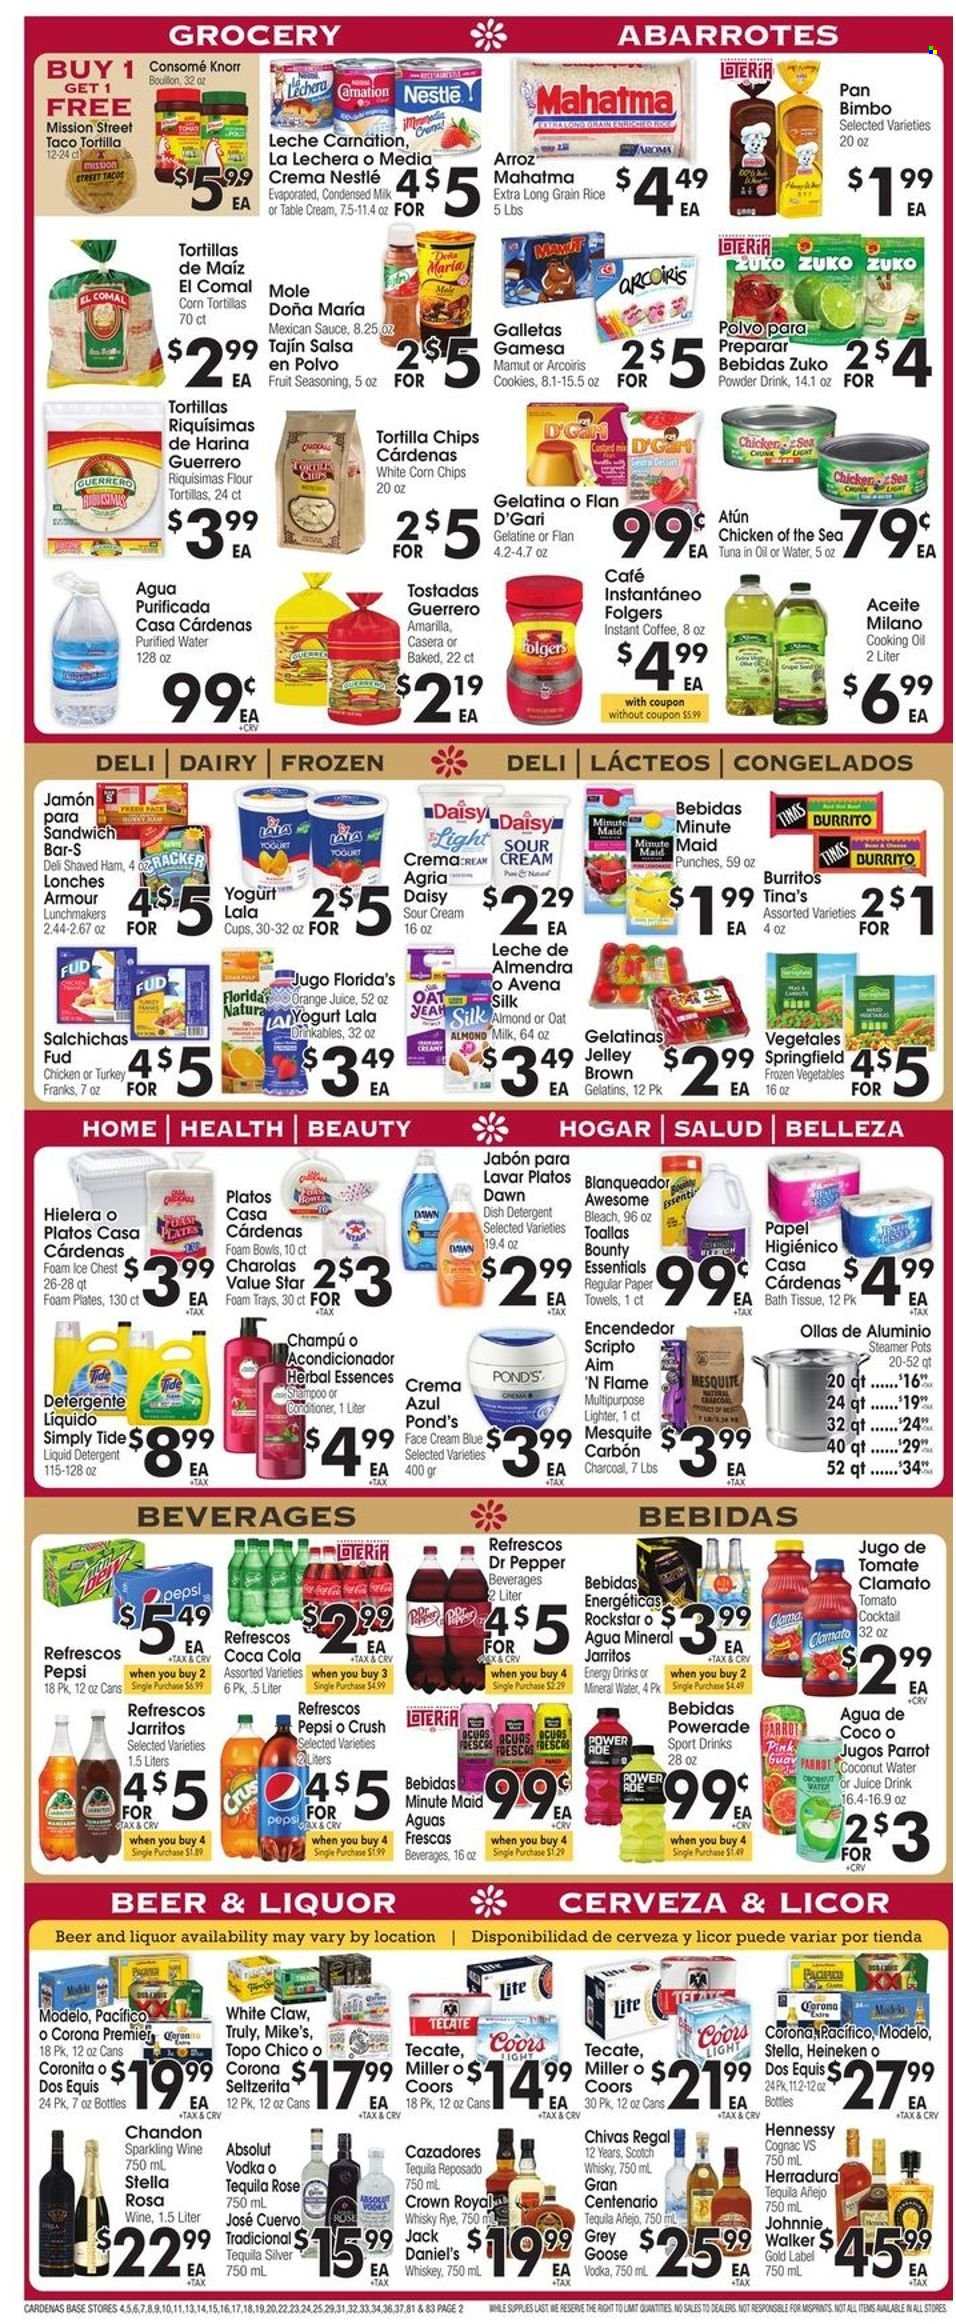 thumbnail - Cardenas Flyer - 05/18/2022 - 05/24/2022 - Sales products - corn tortillas, tostadas, tacos, flour tortillas, tuna, Jack Daniel's, sandwich, Knorr, burrito, ham, yoghurt, almond milk, sour cream, frozen vegetables, cookies, Nestlé, Bounty, tortilla chips, corn chips, Chicken of the Sea, rice, long grain rice, spice, salsa, cooking oil, Coca-Cola, Powerade, Pepsi, orange juice, juice, energy drink, Dr. Pepper, Clamato, coconut water, Rockstar, fruit punch, mineral water, purified water, instant coffee, Folgers, sparkling wine, cognac, tequila, vodka, whiskey, Hennessy, liquor, Absolut, Chivas Regal, White Claw, TRULY, scotch whisky, whisky, beer, Corona Extra, Heineken, Miller, Modelo, bath tissue, detergent, bleach, Tide, liquid detergent, POND'S, face cream, Herbal Essences, plate, pot, pan, cup, paper, foam plates, Coors, Dos Equis. Page 2.